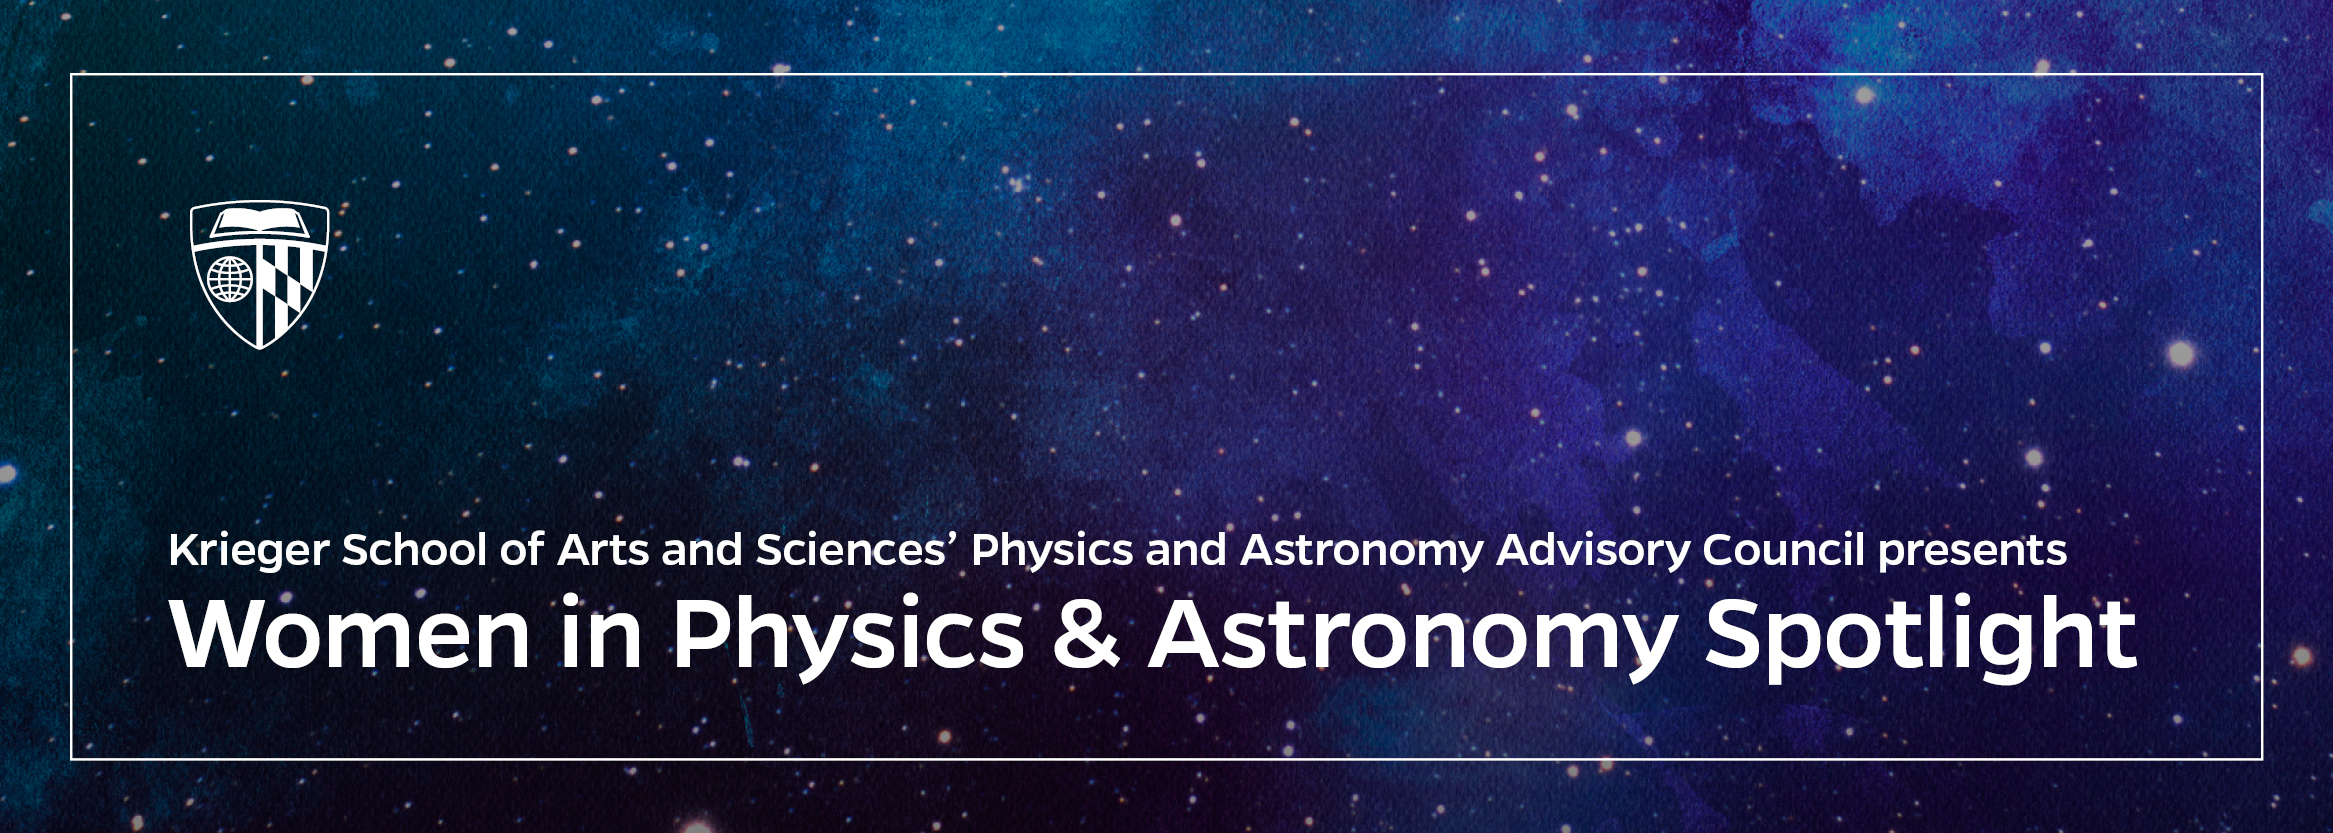 Krieger School of Arts and Sciences' Women in Physics & Astronomy Spotlight